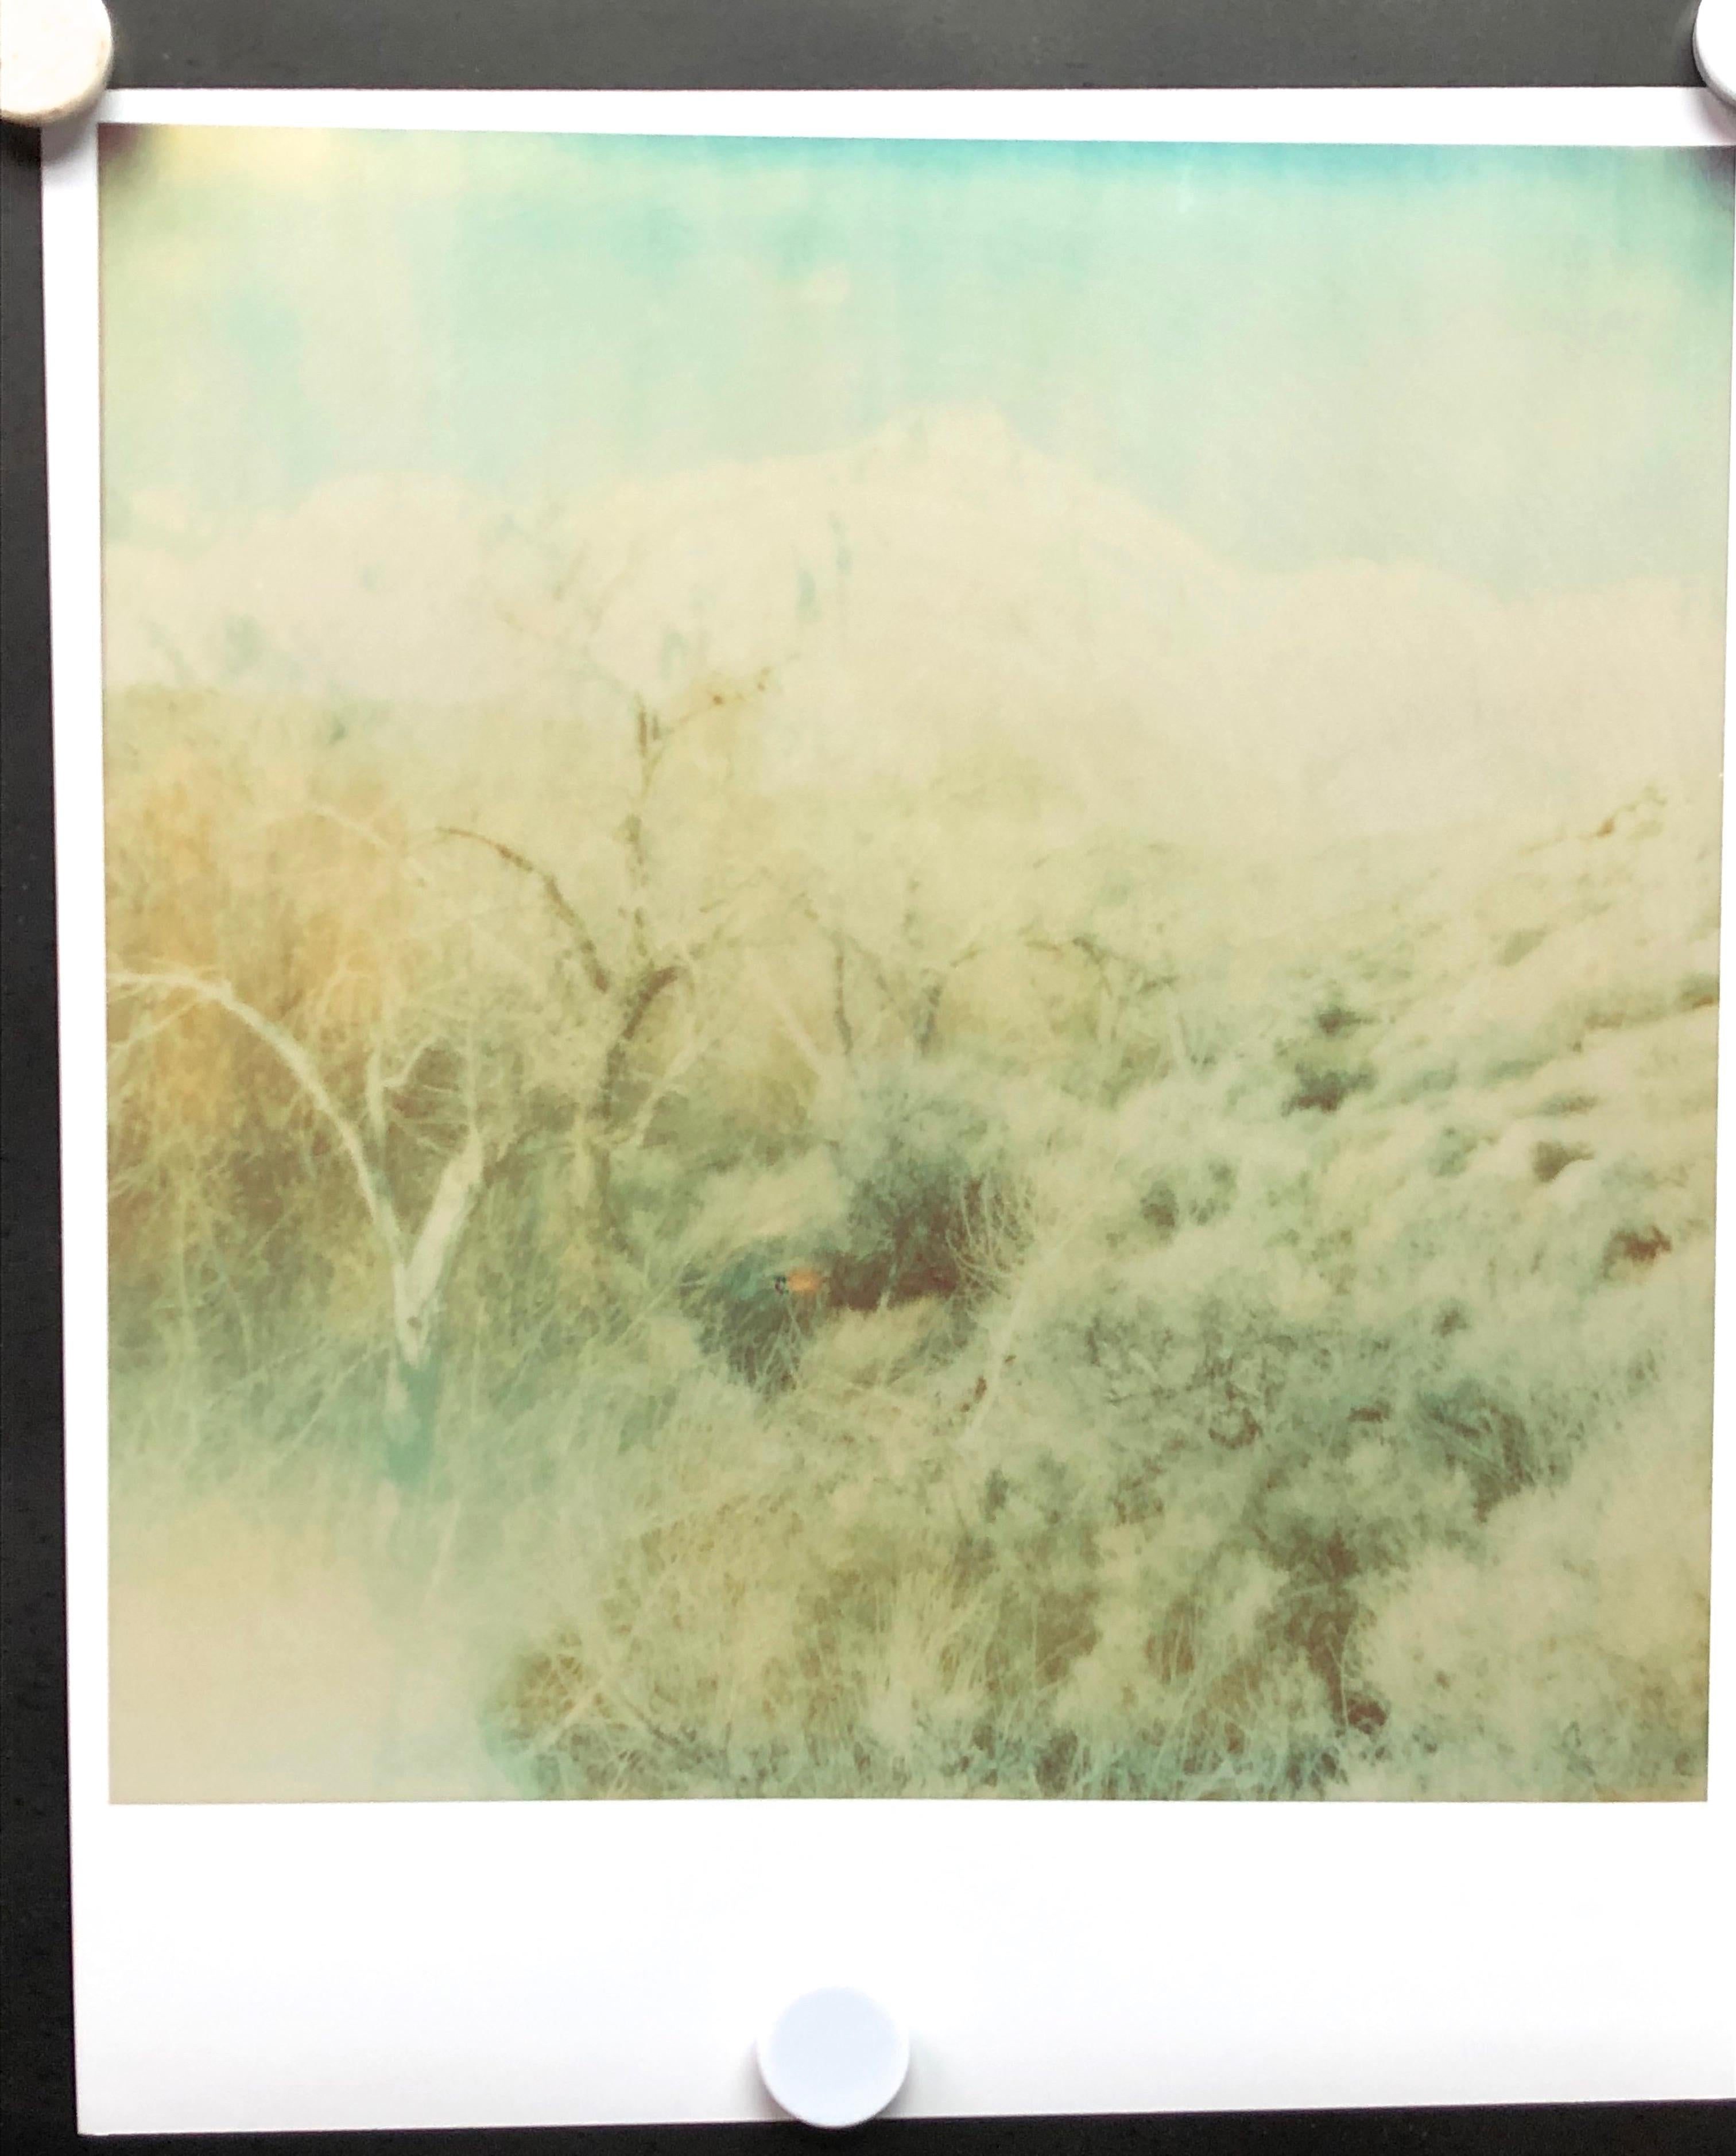 Wind Swept (Wastelands), diptych - 2003

Edition of 5, 
38x82cm installed, 38x37cm each. 
Analog C-Print, hand-printed by the artist 
on Fuji Crystal Archive Paper, matte finish.
based on the 2 Polaroids. 
Signature label and Certificate,
Artist